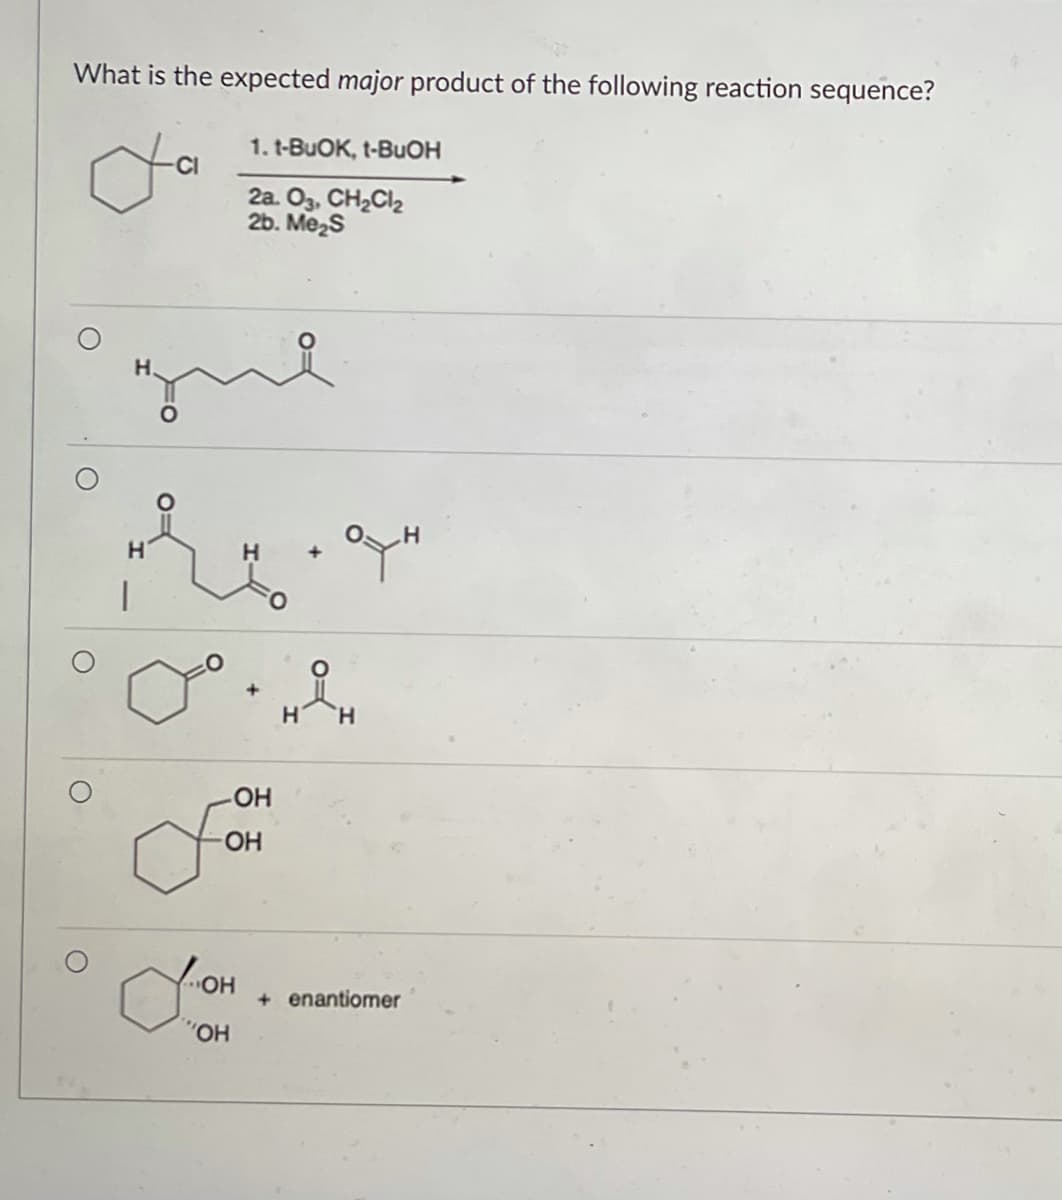 What is the expected major product of the following reaction sequence?
CI
que
میں
1. t-BuOK, t-BuOH
2a. 03, CH₂Cl₂
2b. Me₂S
"OH
+
OH
OH
+
OTH
HiH
+ enantiomer